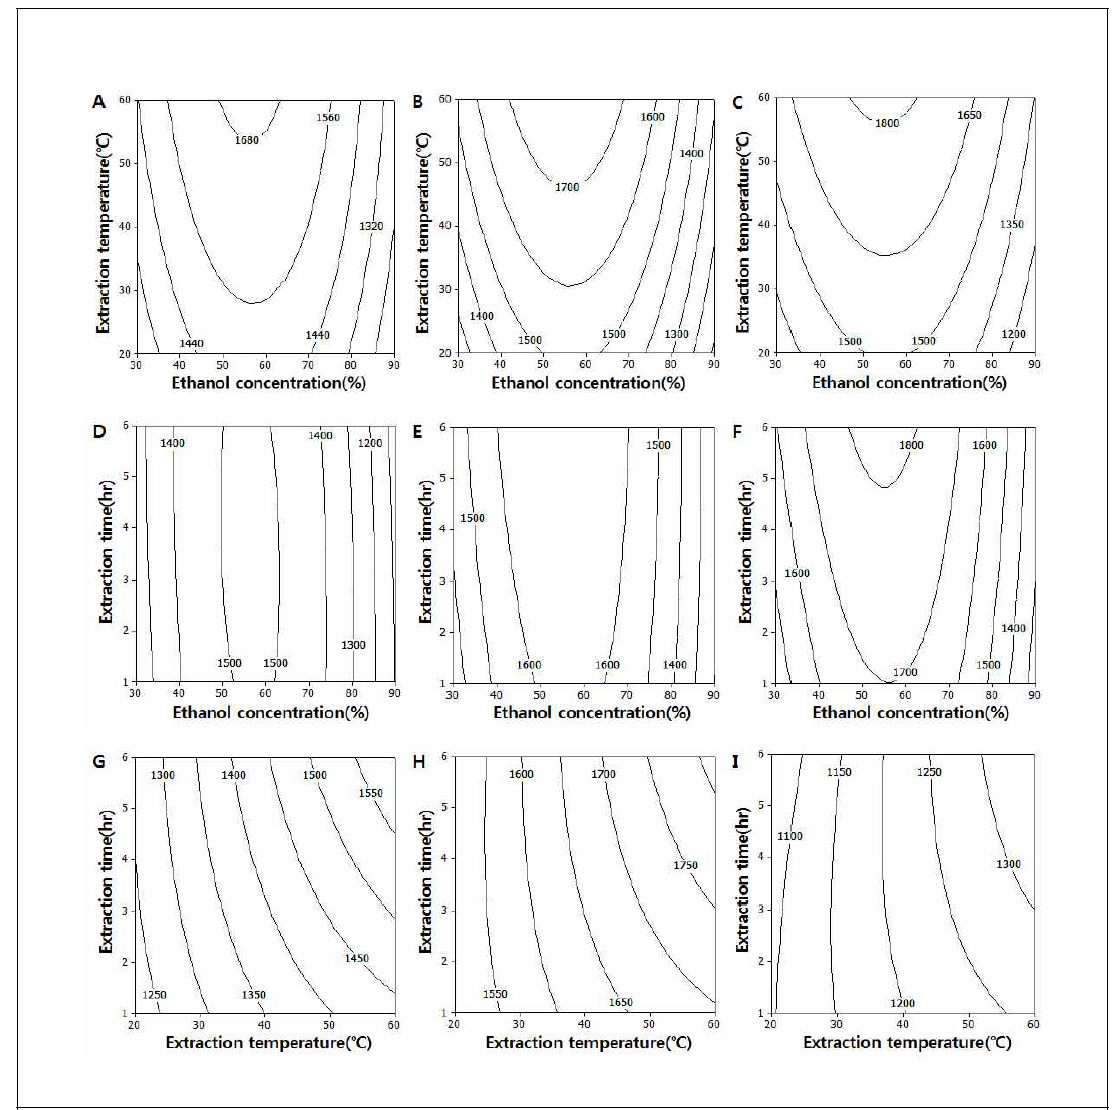 Contour plot for total flavonoid contents (mg/100g) of ethanol extracts from corn silk (Extraction time, A: 1 hr, B: 3.5 hr, C: 6 hr ; Extraction temperature, D: 20℃, E: 40℃, F: 60℃ ; Ethanol concentration, G: 30%, H: 60%, I: 90%)